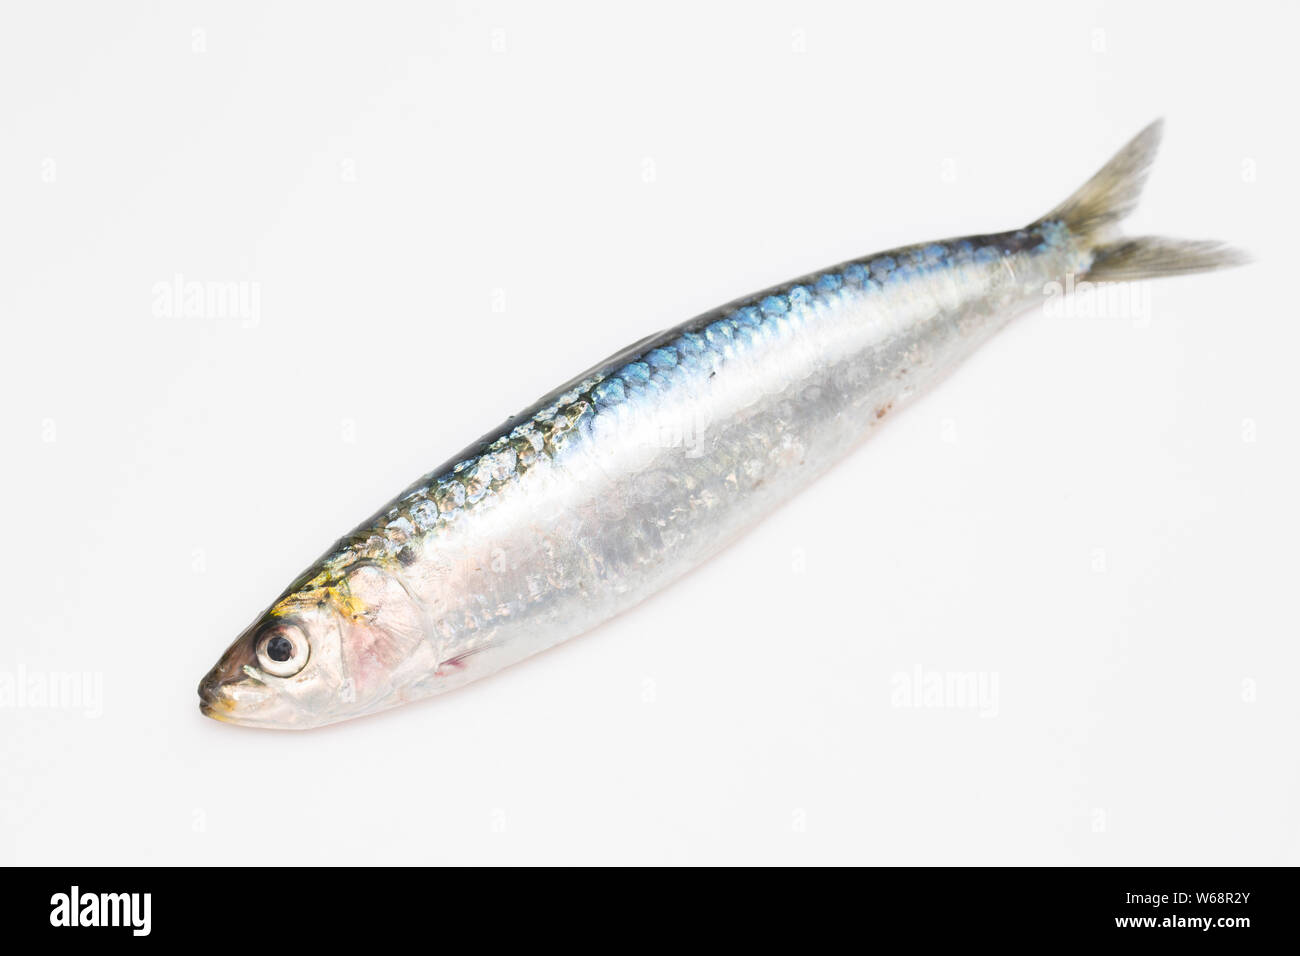 A single, raw sardine, or european pilchard, Sardina pilchardus, that was caught with a fishing rod using small lures known as micro feathers, from a Stock Photo